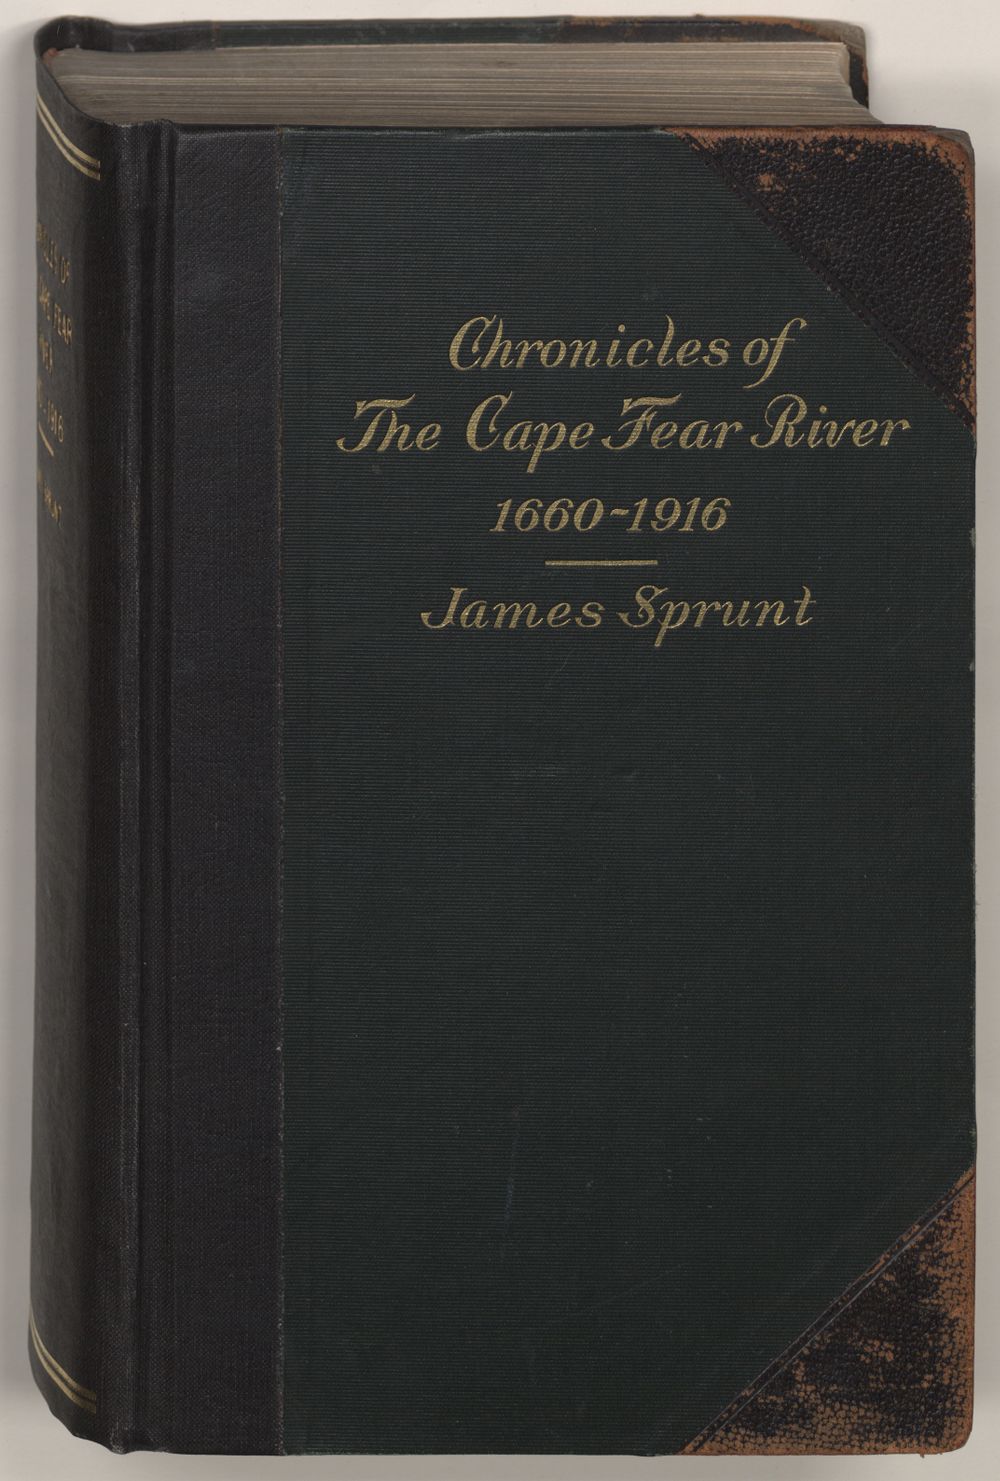 Chronicles of the Cape Fear river, 1660-1916